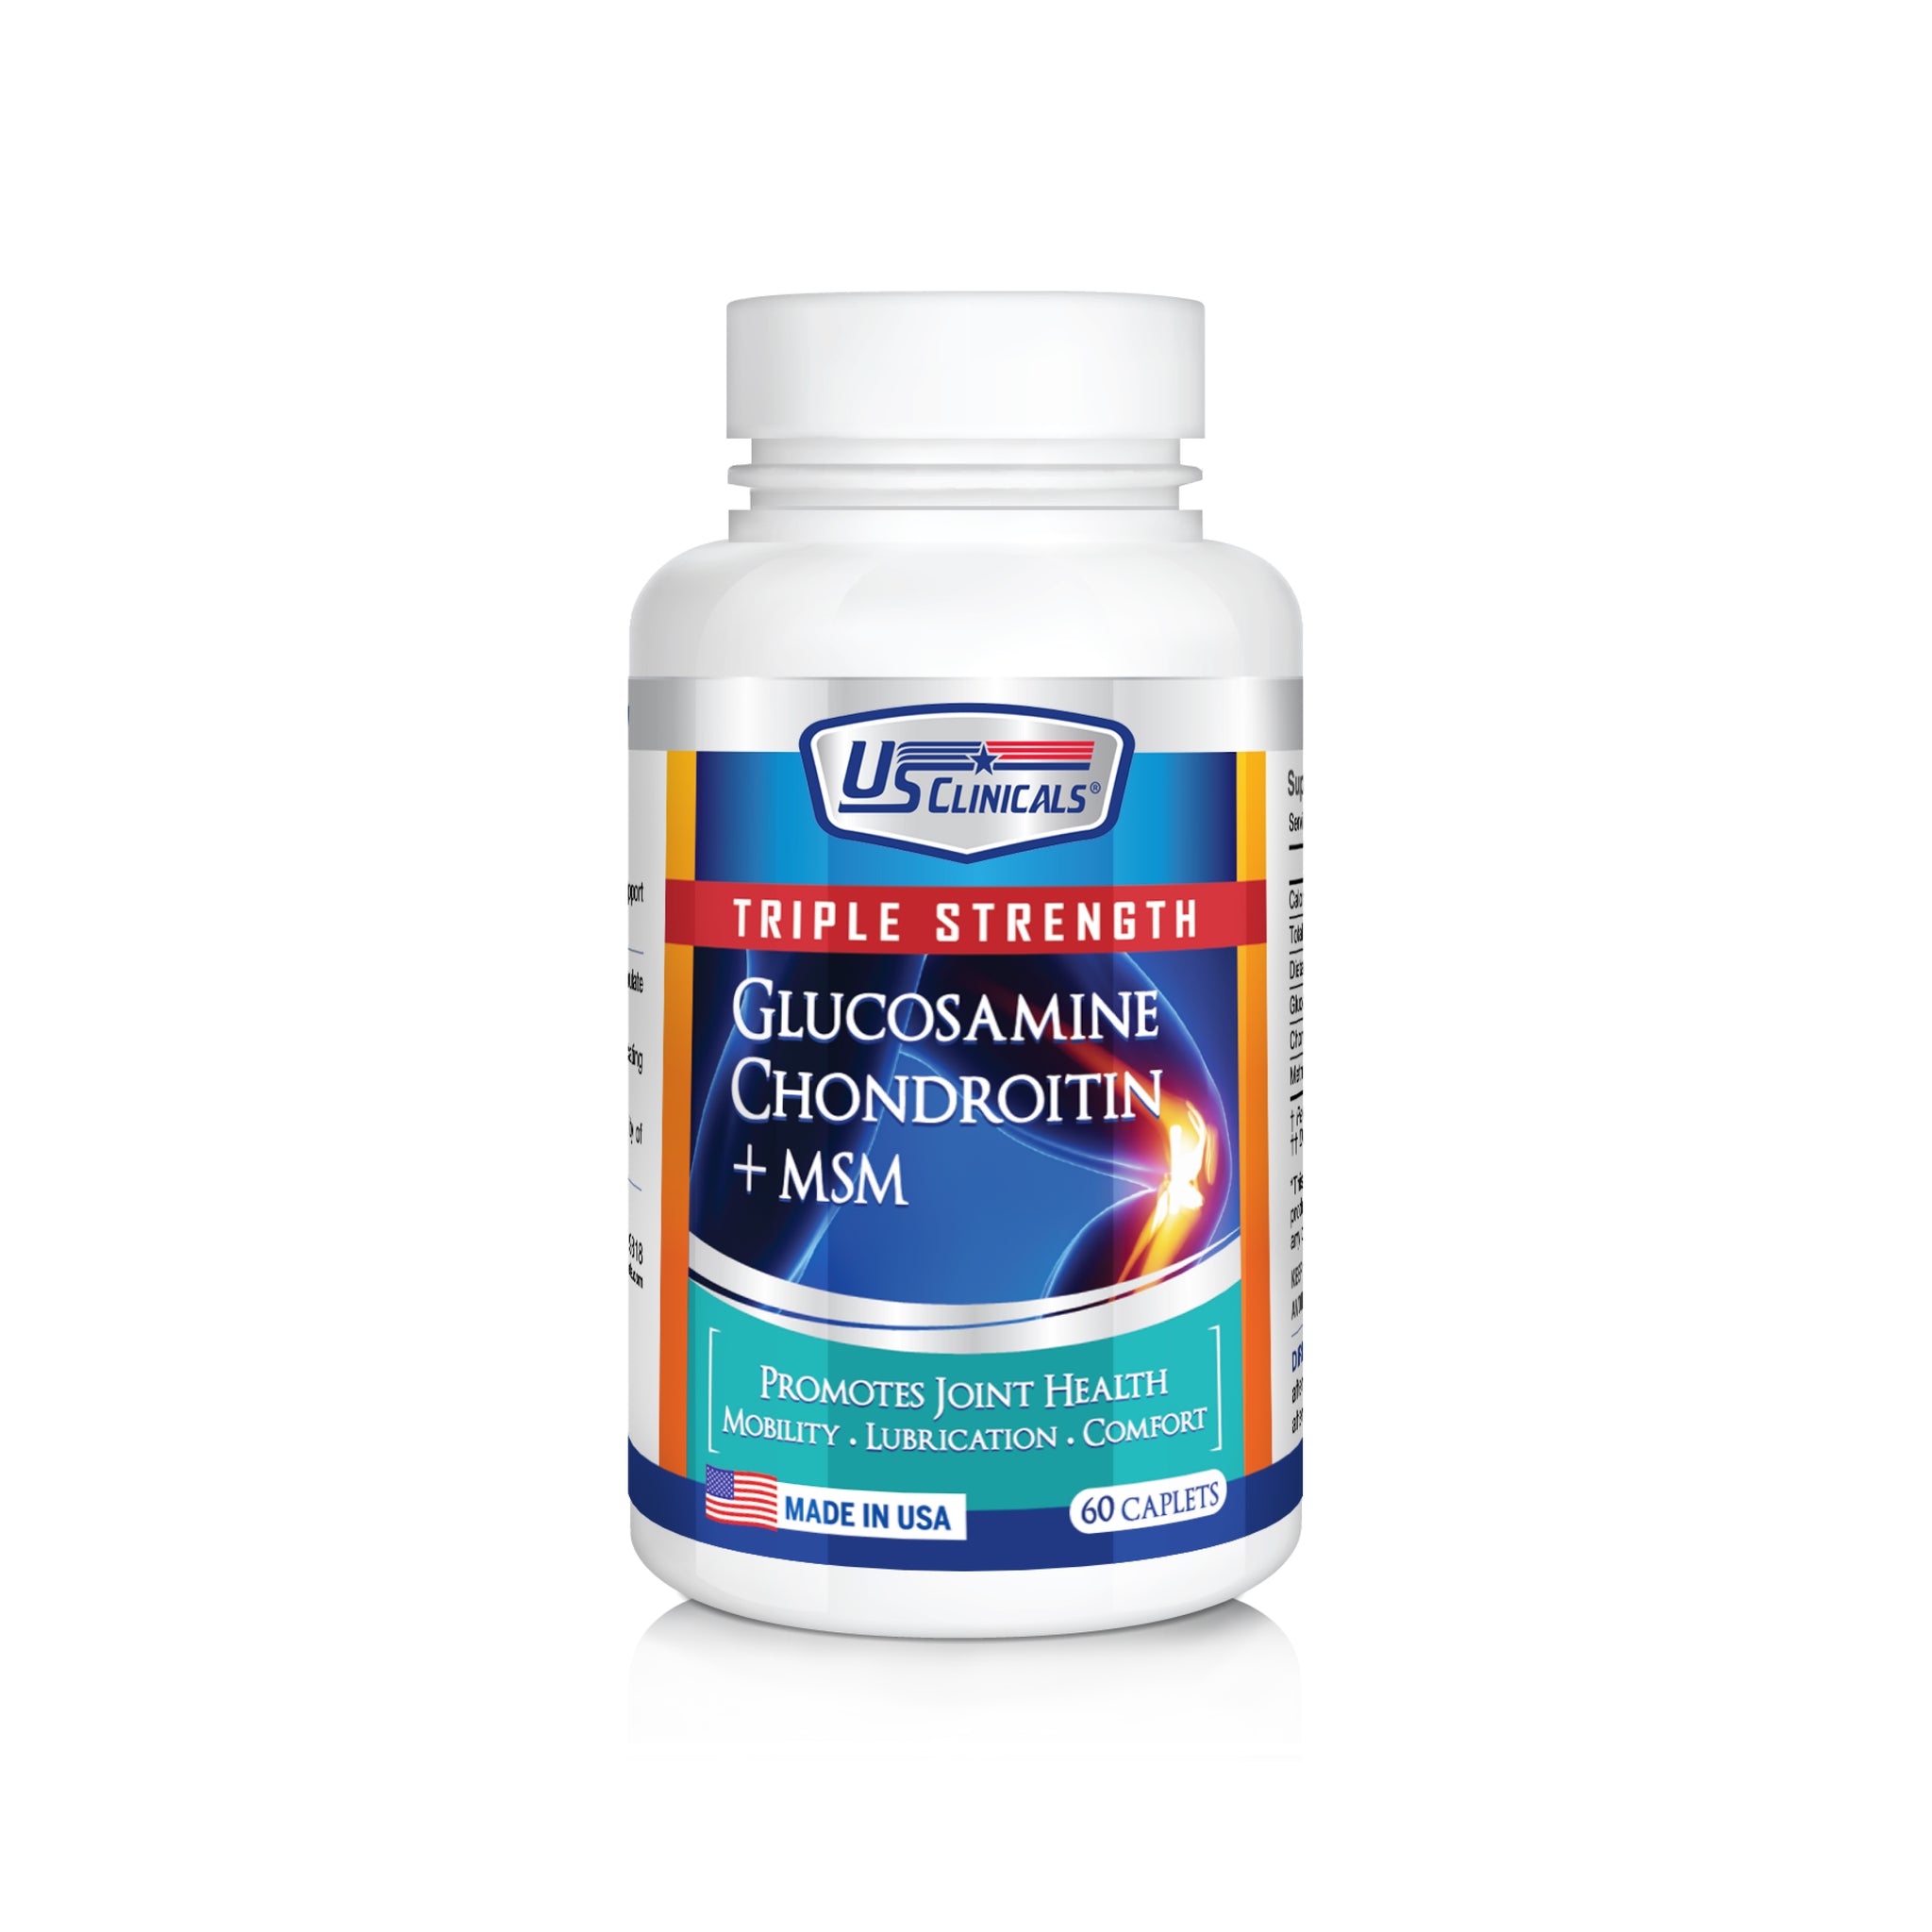 US Clinicals® Triple Strength Glucosamine Chondroitin + MSM.